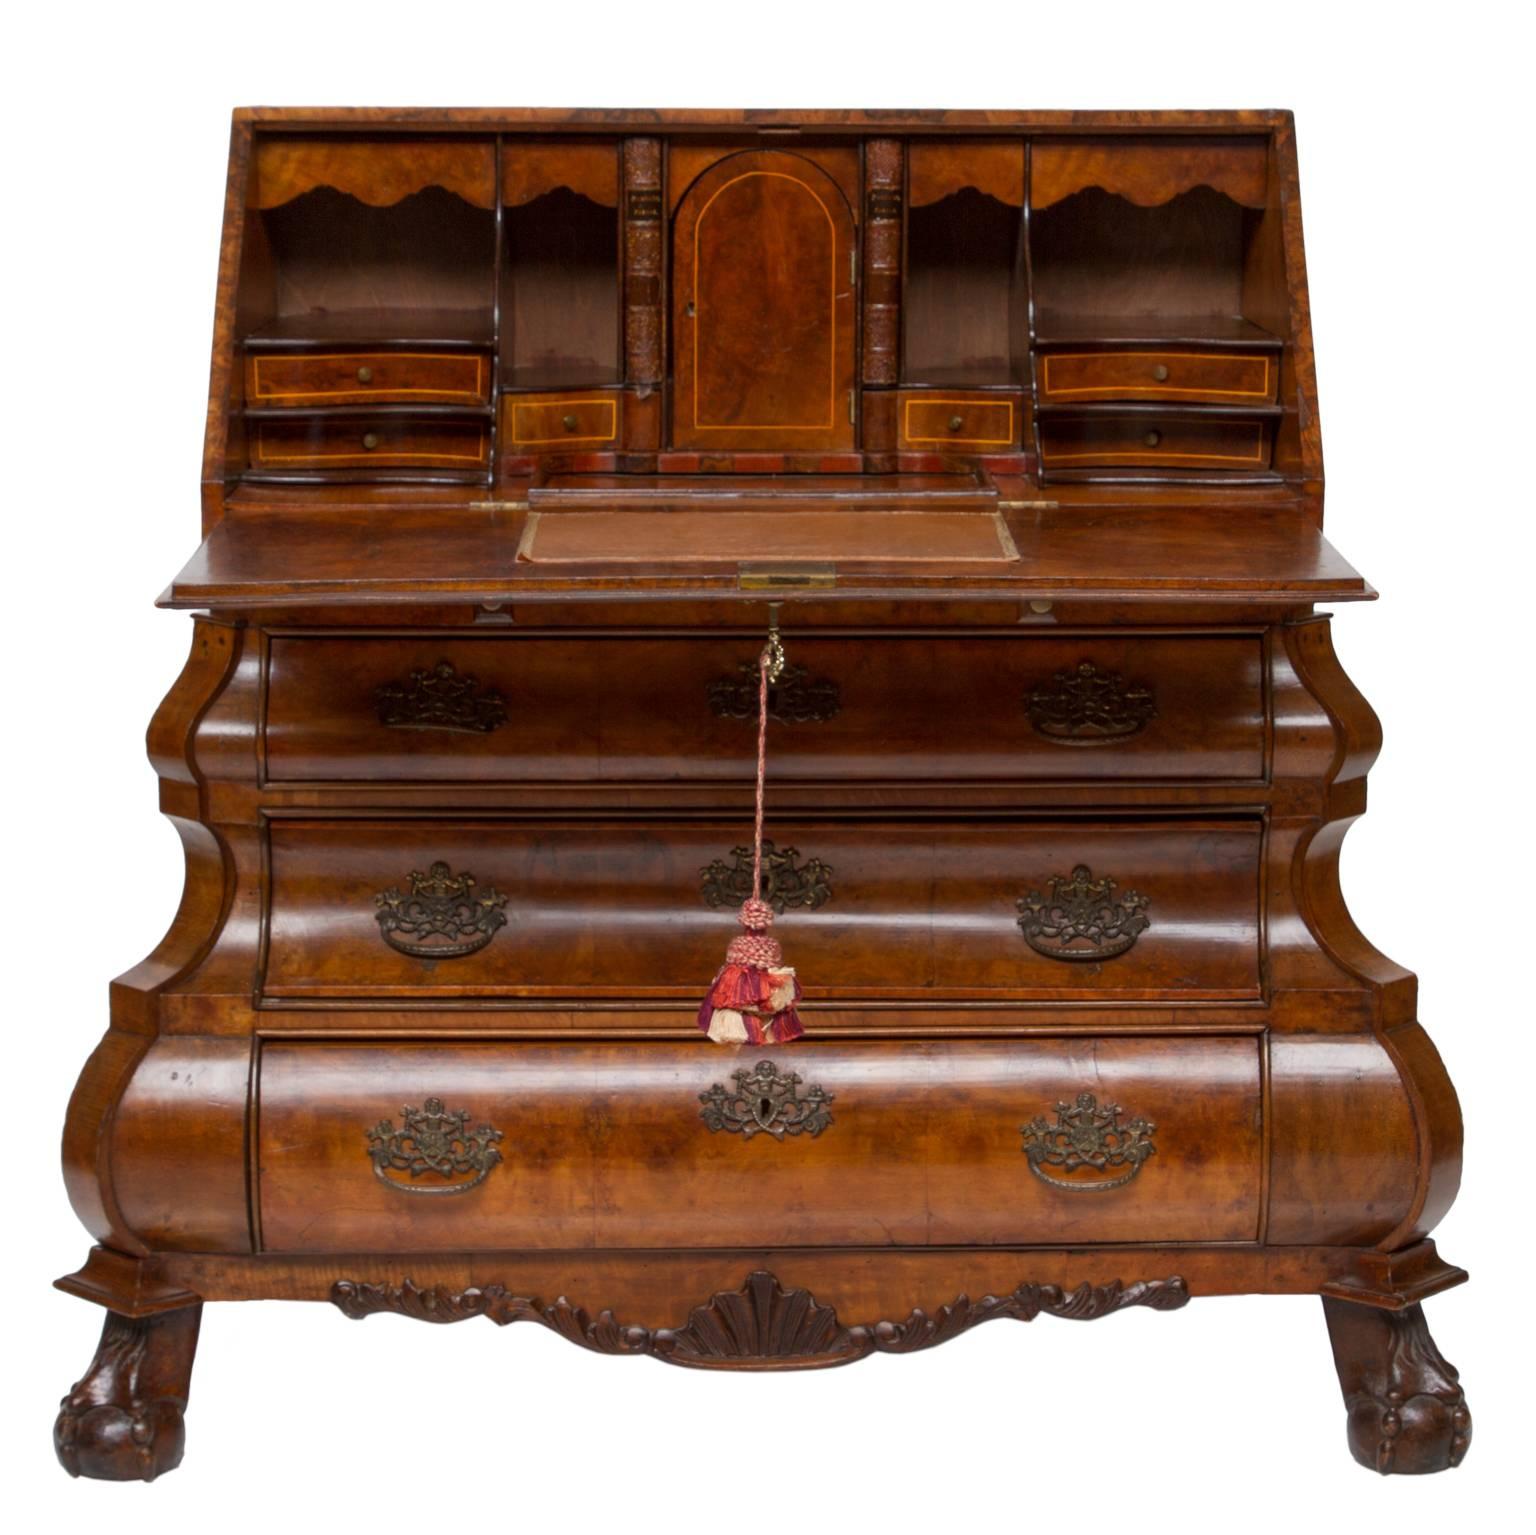 19th century Dutch bombè bureau
Here is a very clean 19th century bureau with fitted interior, Graceful bombé shaped front, decorated hardware, beautiful burl walnut front and straight walnut grain walnut side, hand-carved apron and bracket feet in